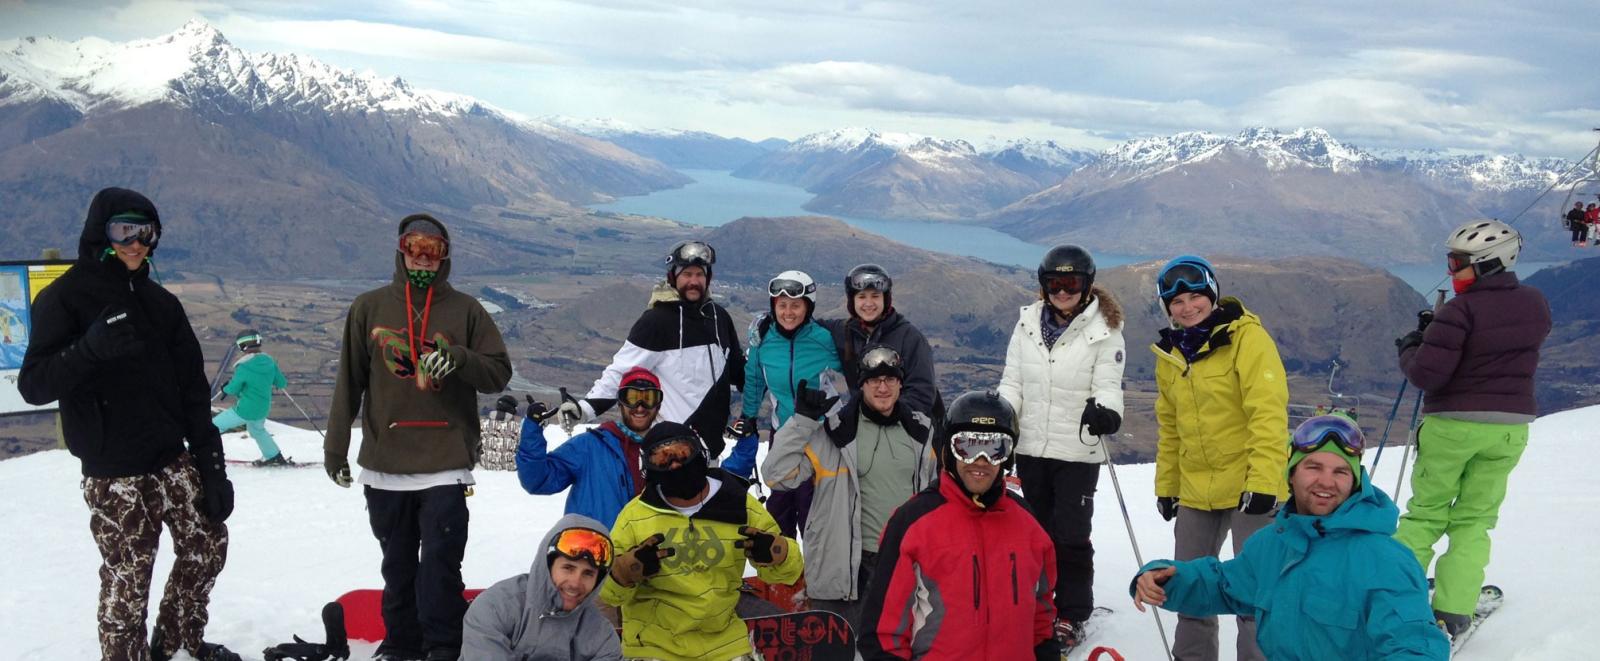 A very happy ski group sitting atop a Queenstown skifield.